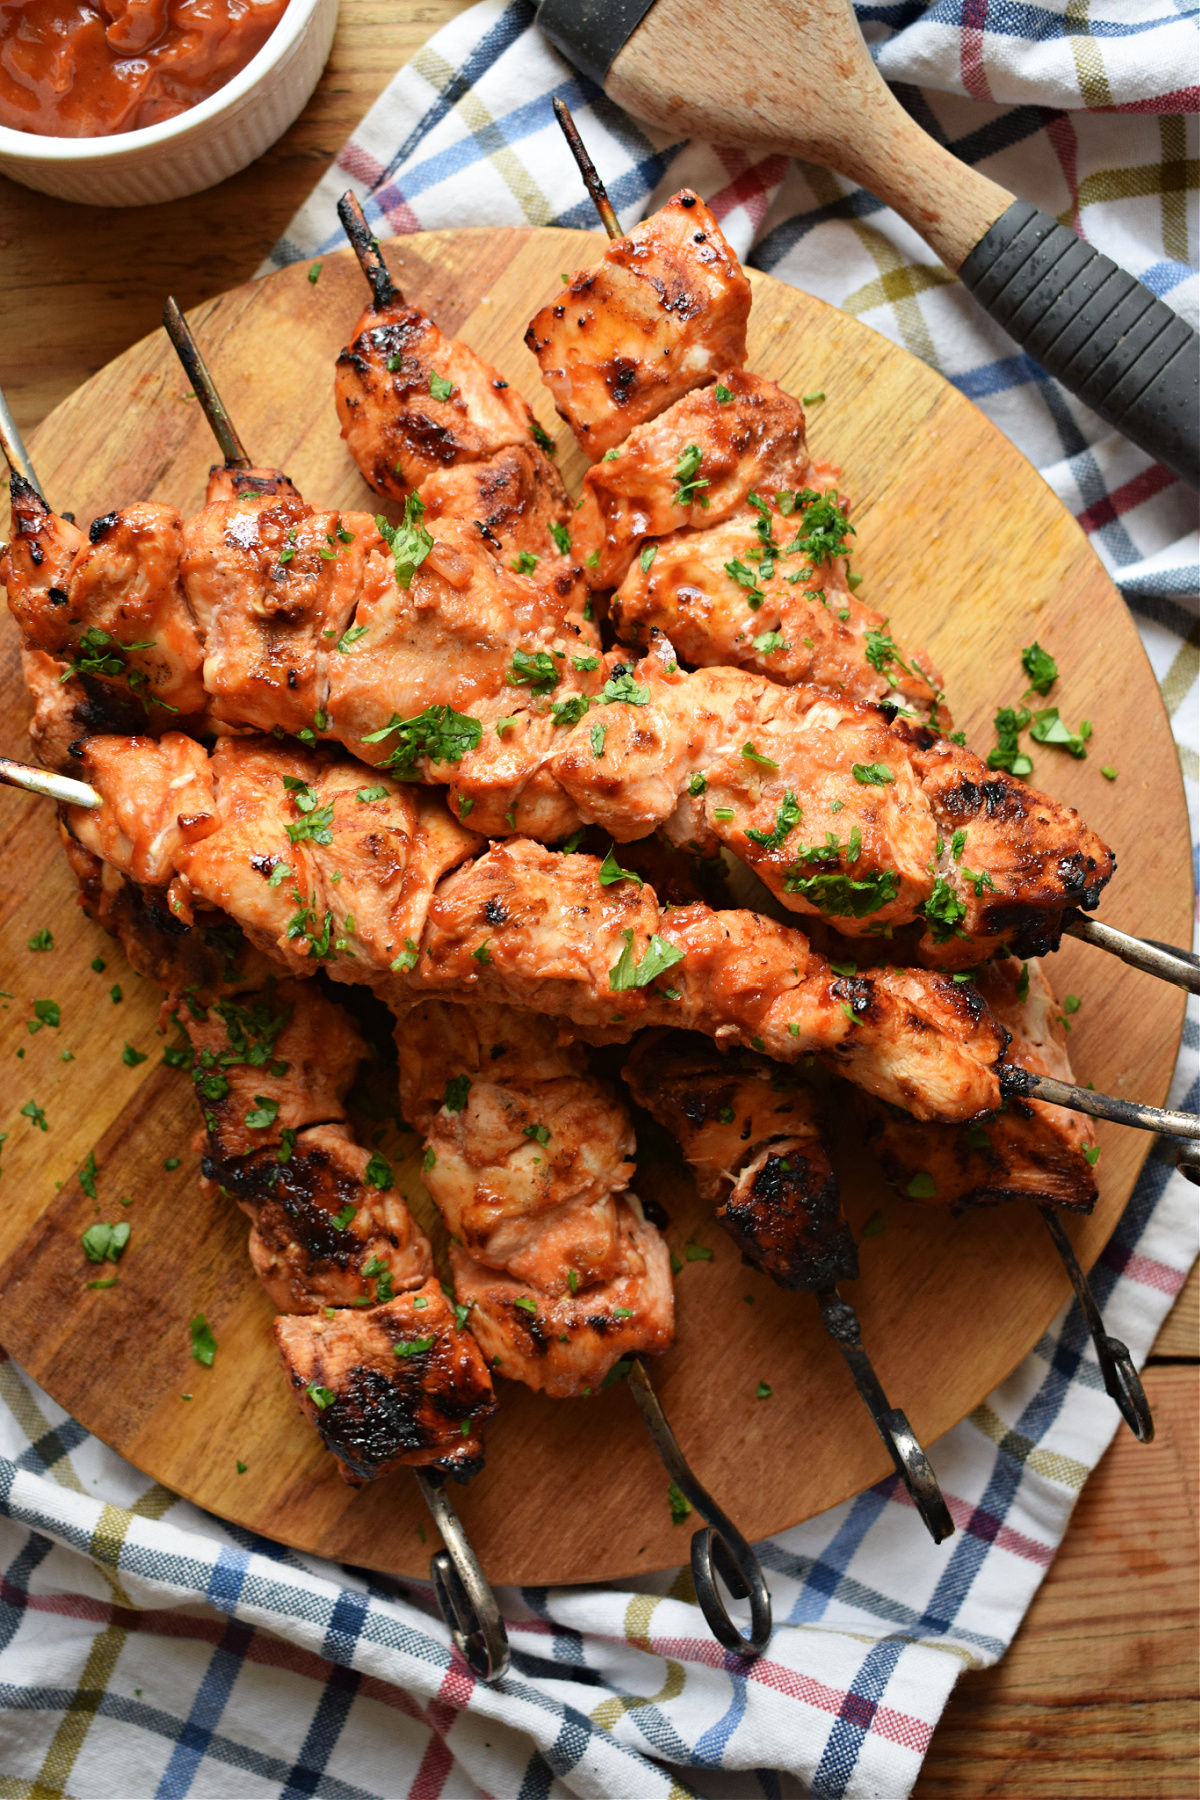 over head view of the grilled barbecue chicken skewers